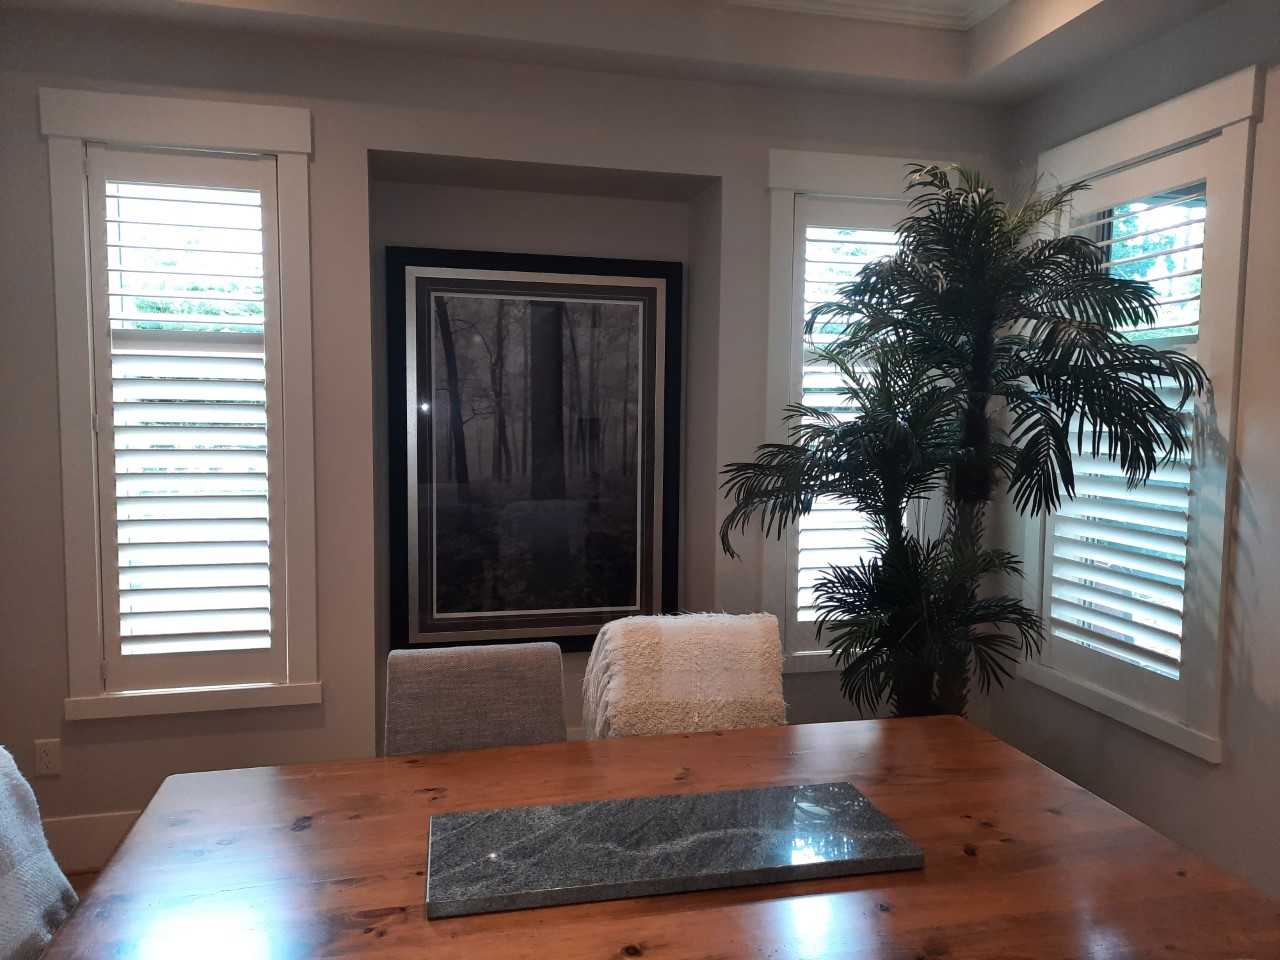 Dining Room Shutters Budget Blinds of Comox Valley and Campbell River Courtenay (250)338-8564